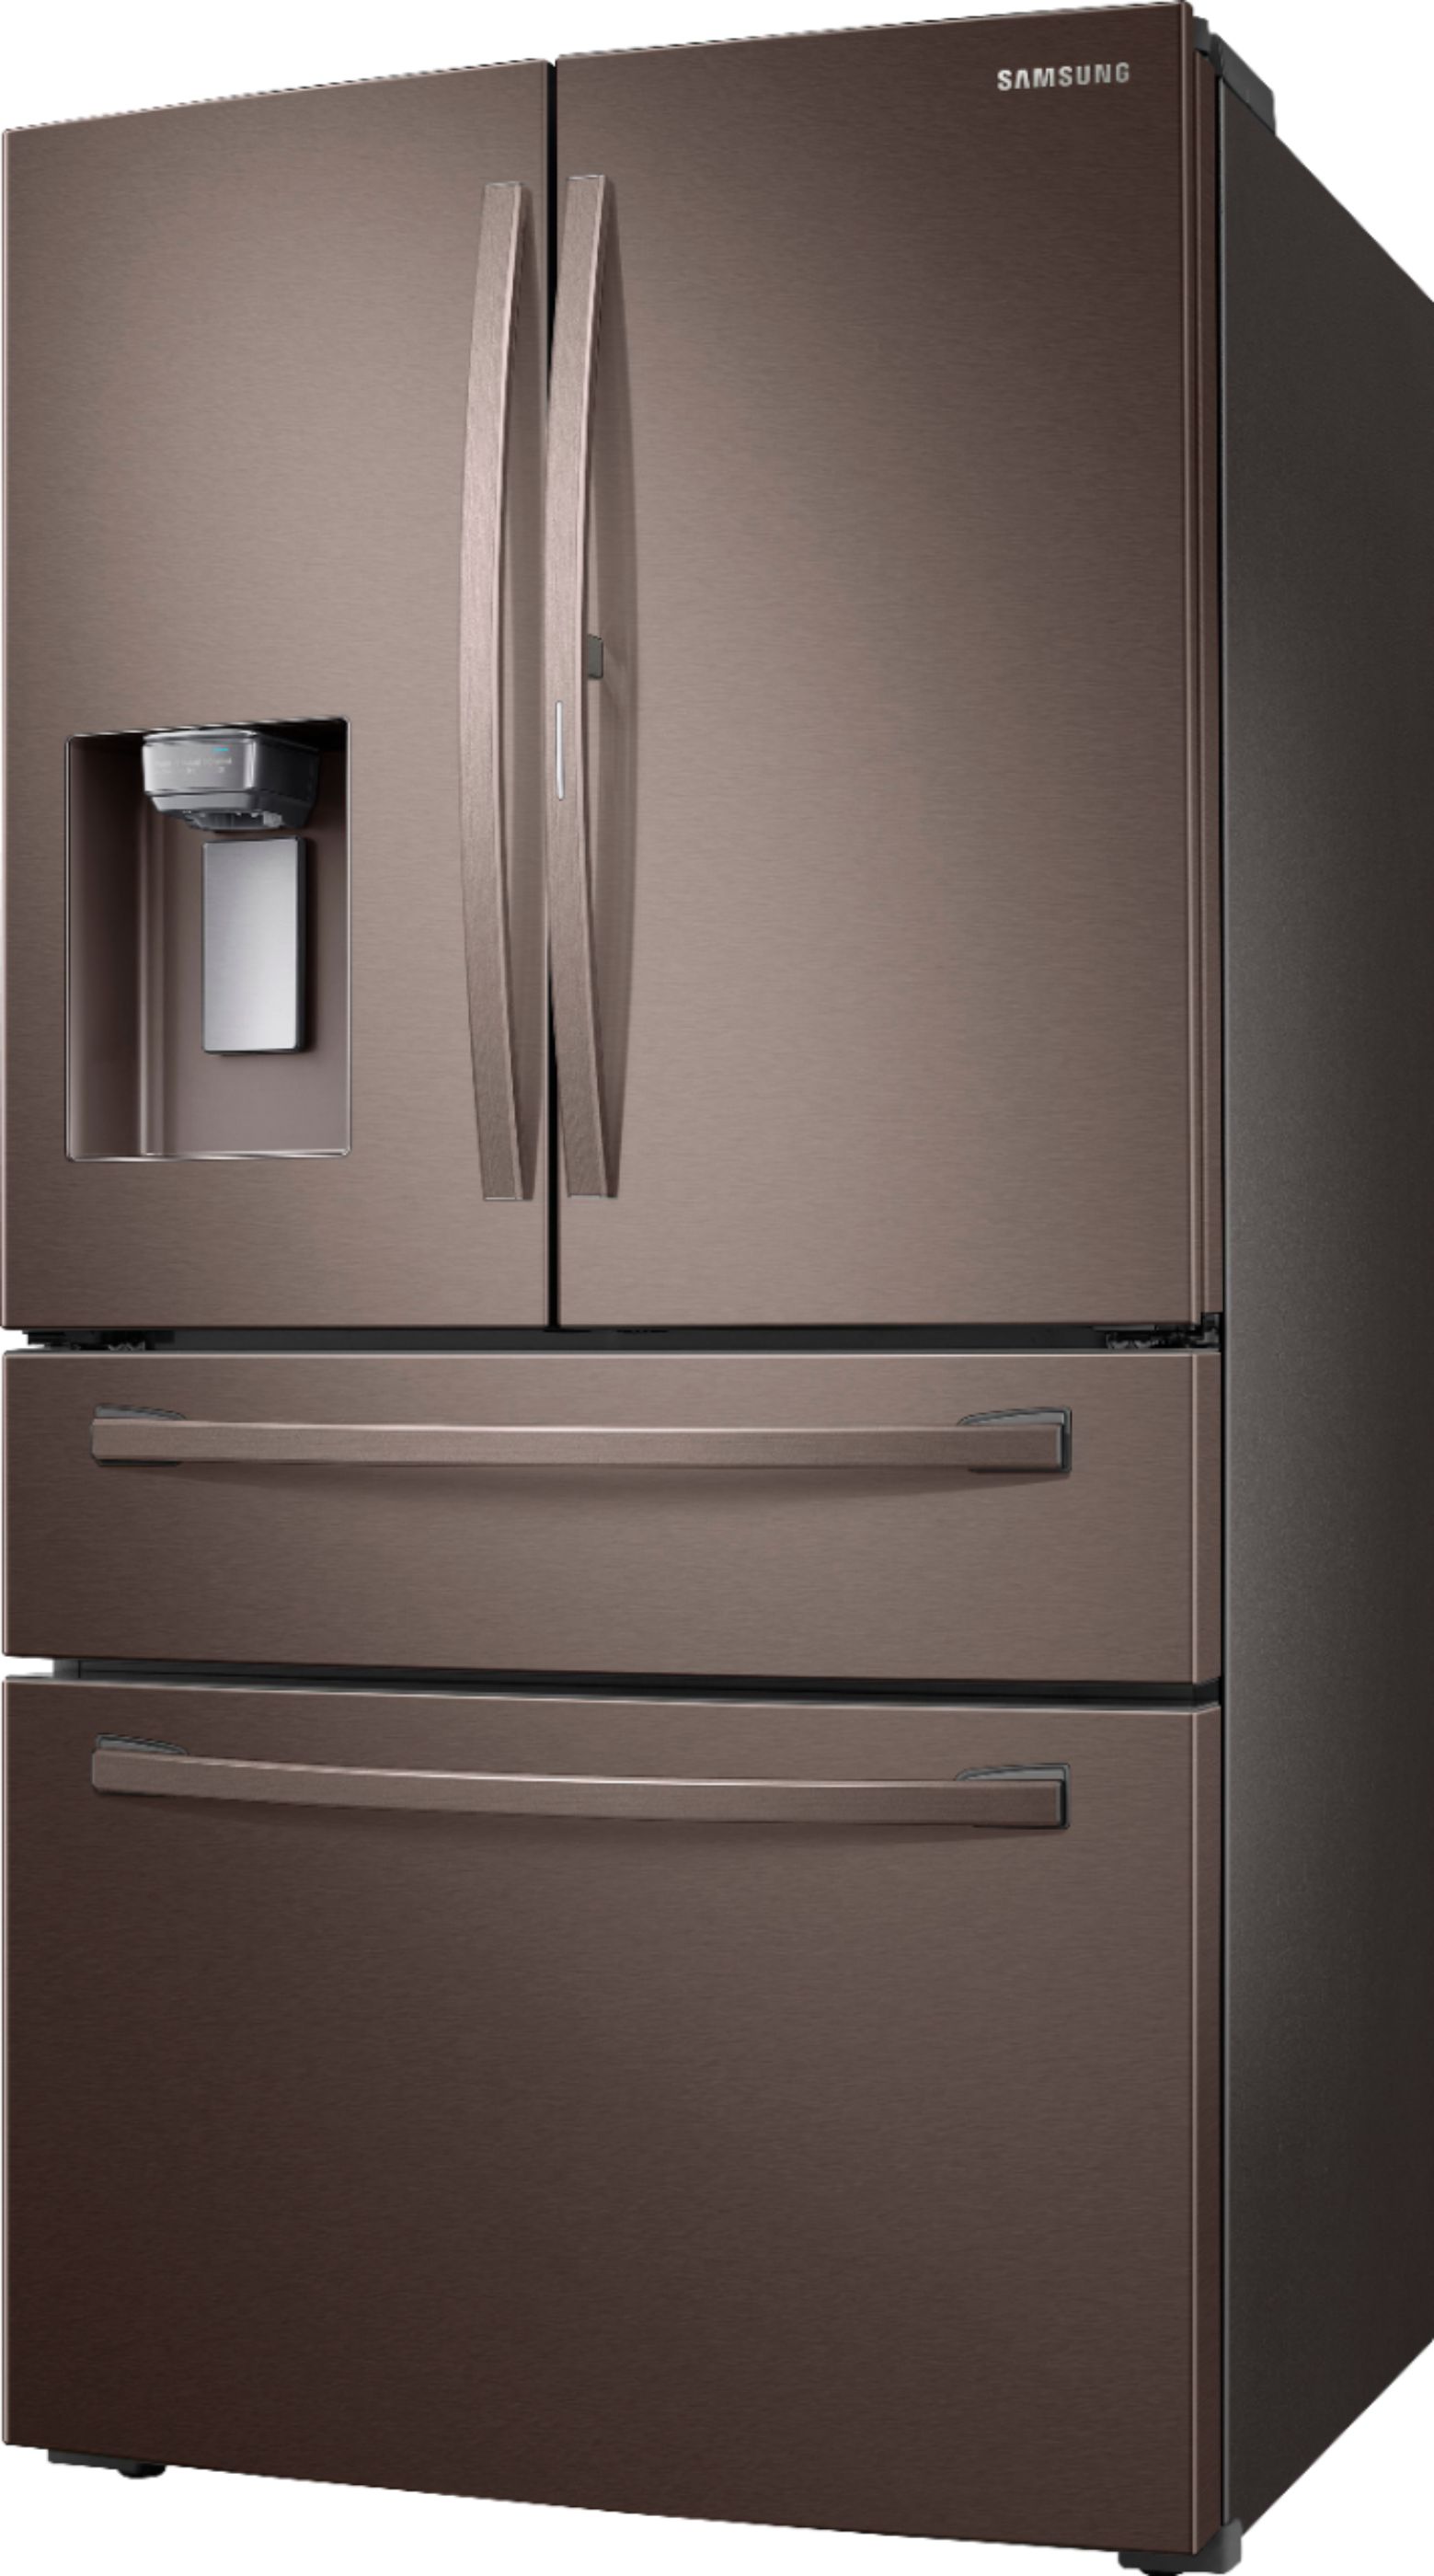 Left View: Samsung - 22.4 Cu. Ft. 4-Door French Door Counter-Depth Refrigerator with Food Showcase - Tuscan stainless steel